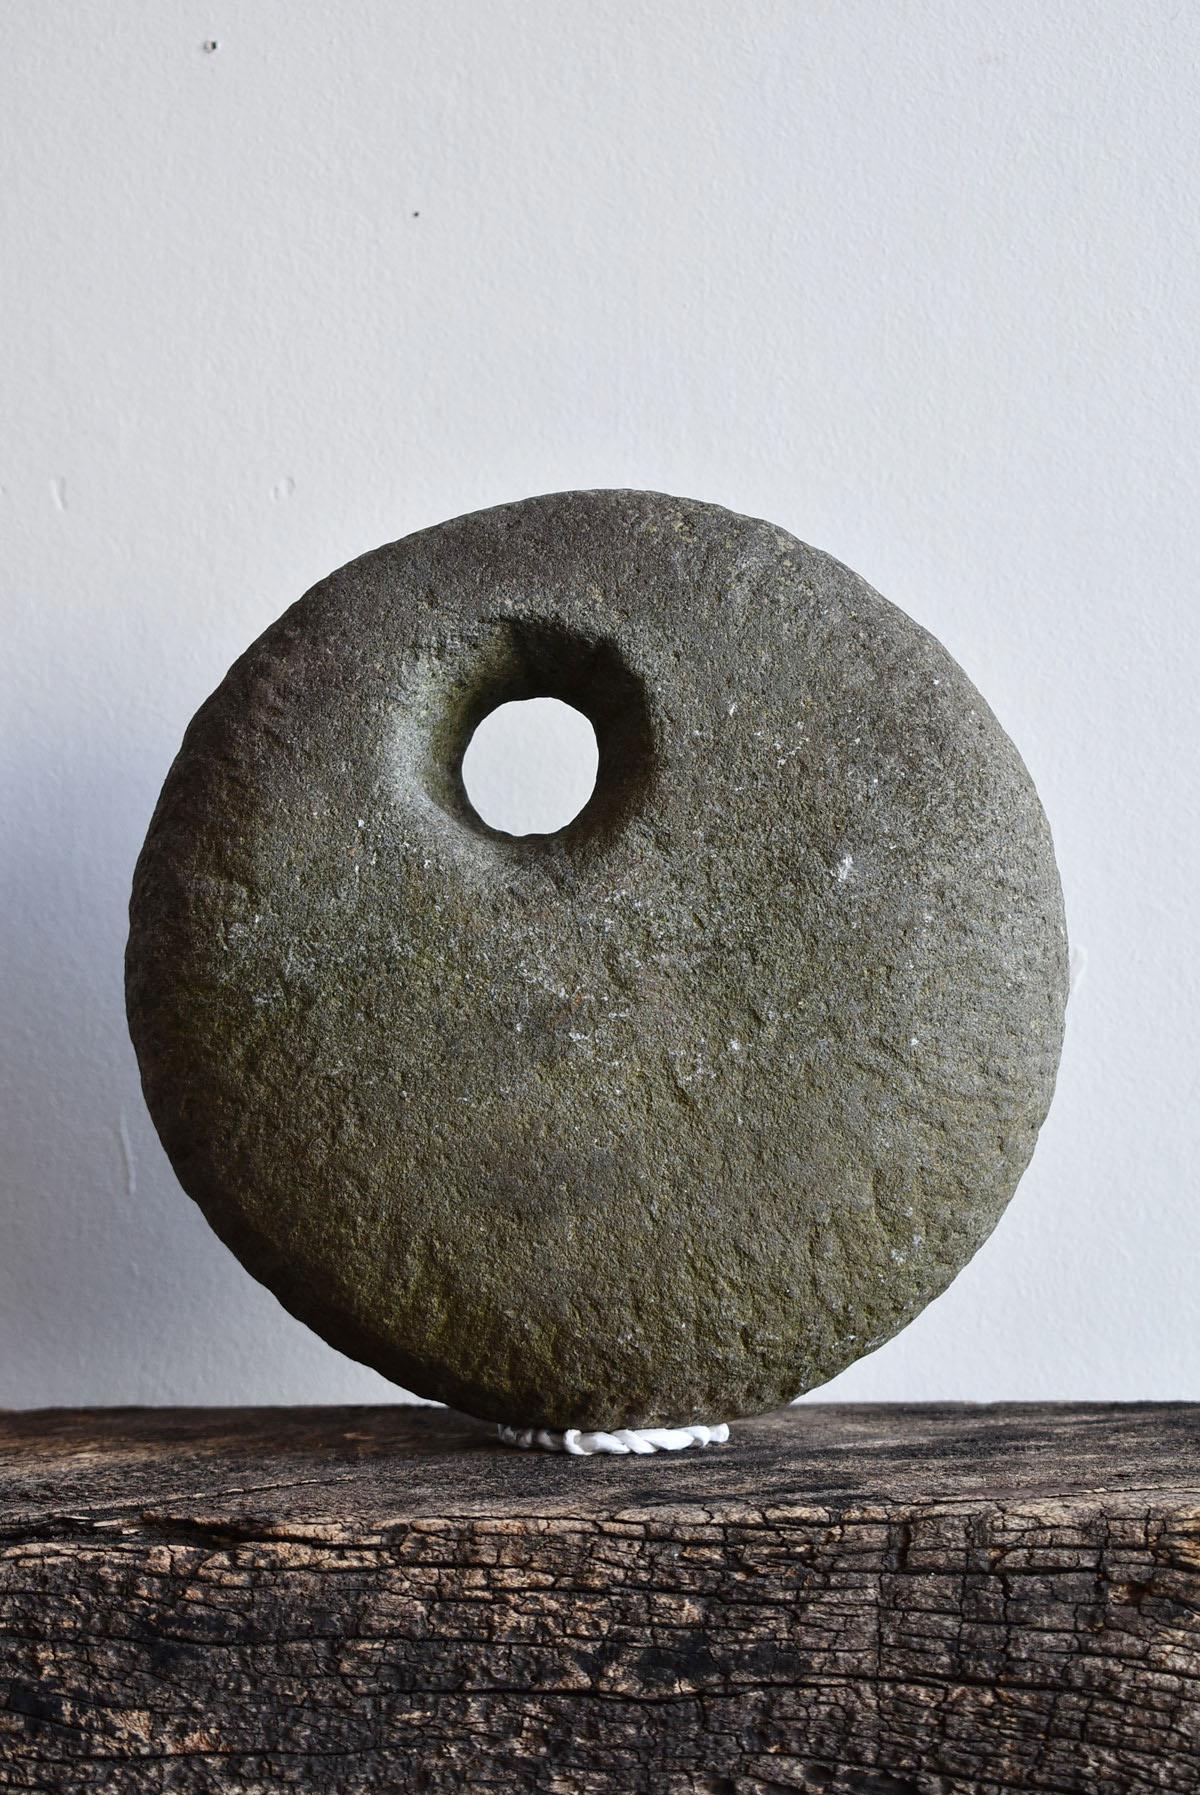 Japanese Antique Disc Stone with Holes / Appreciation Stone / Scholar's Stone 1